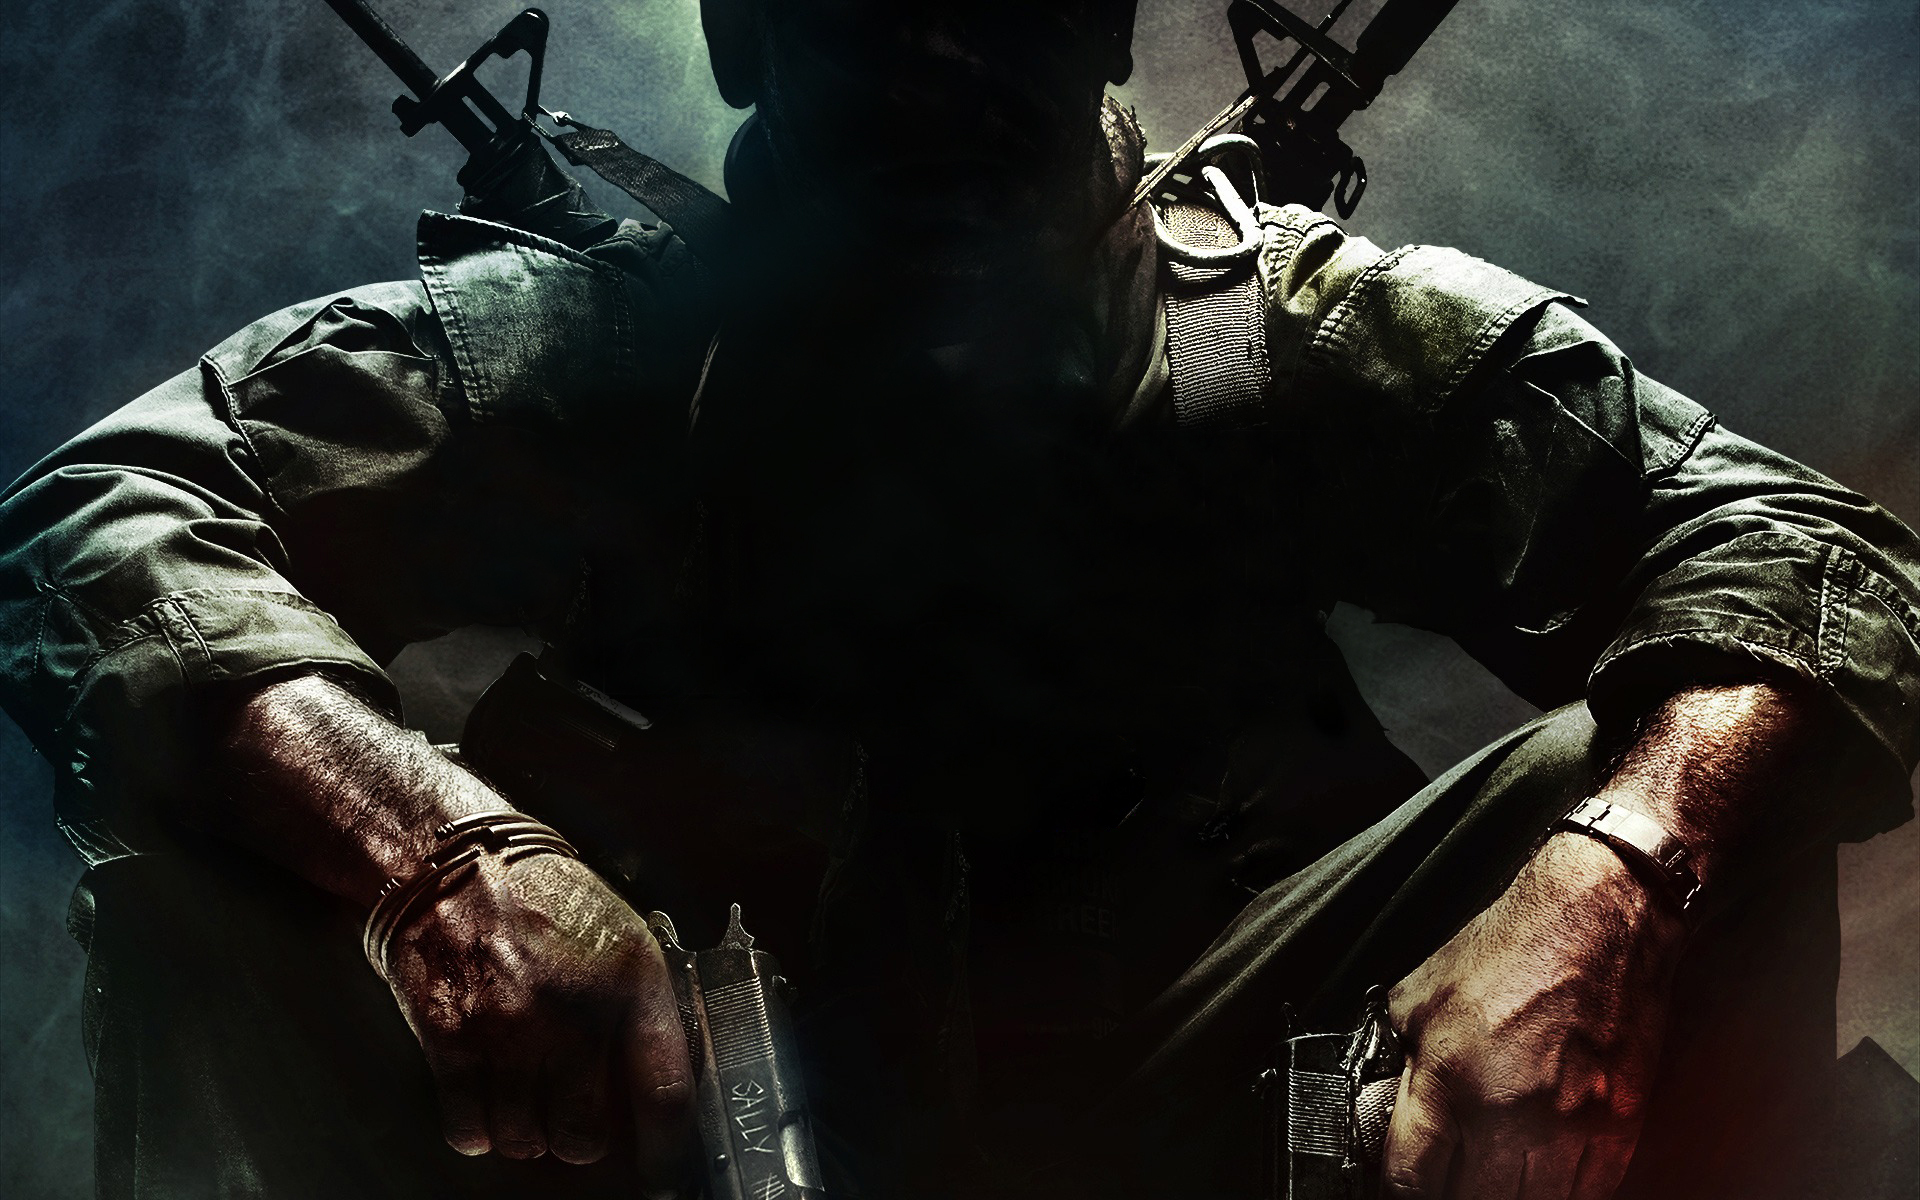 Call Of Duty Black Ops 1 Wallpapers Group (66+)